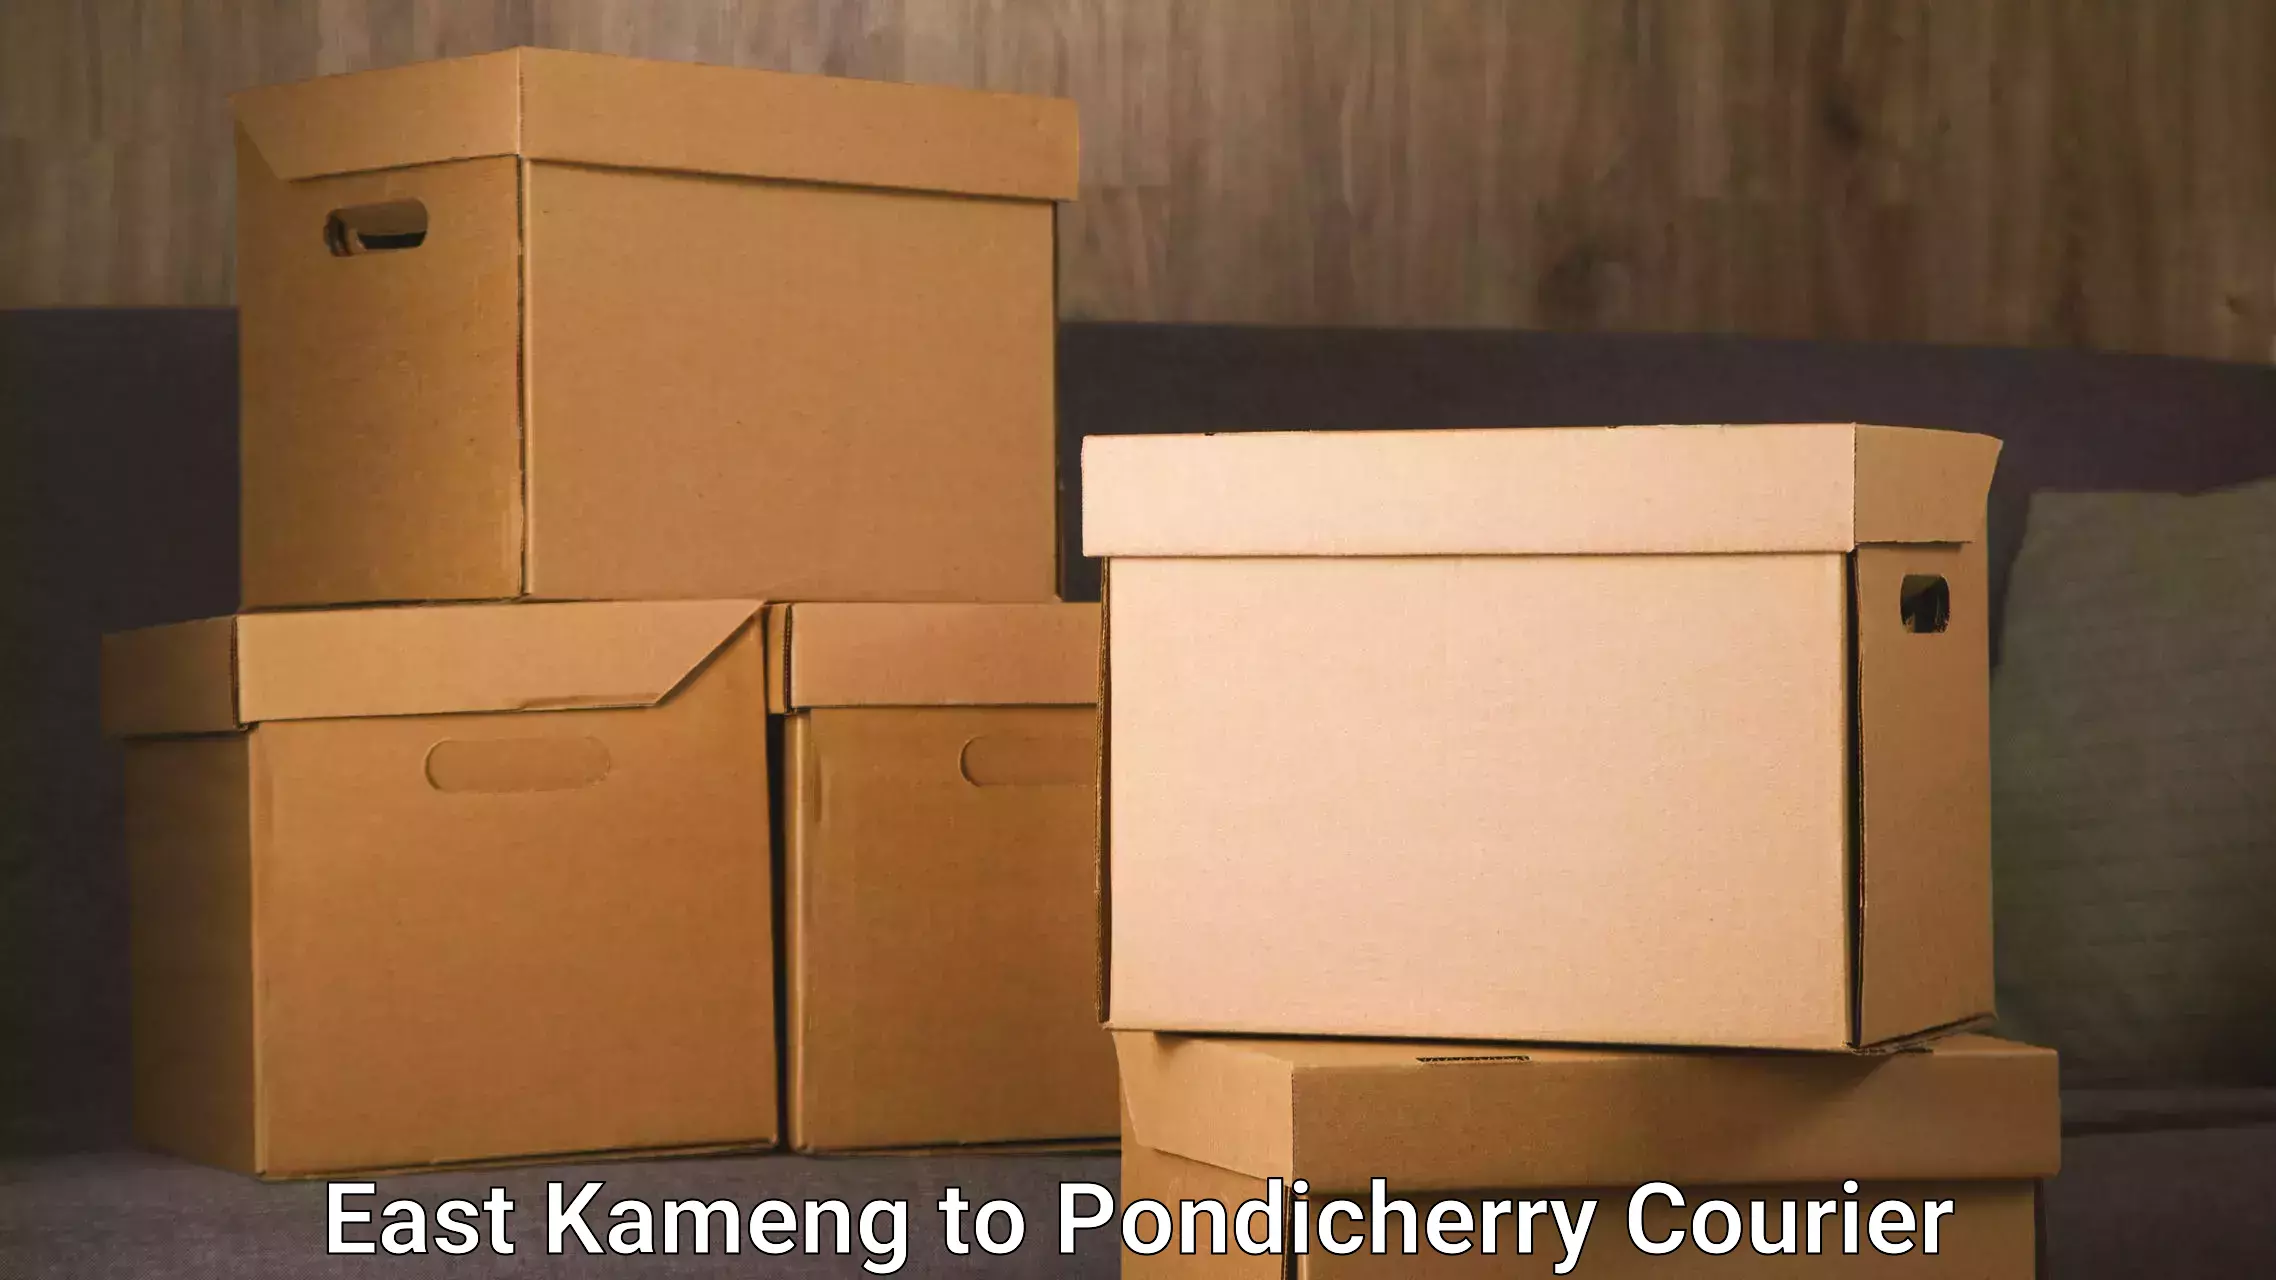 Courier service innovation East Kameng to Pondicherry